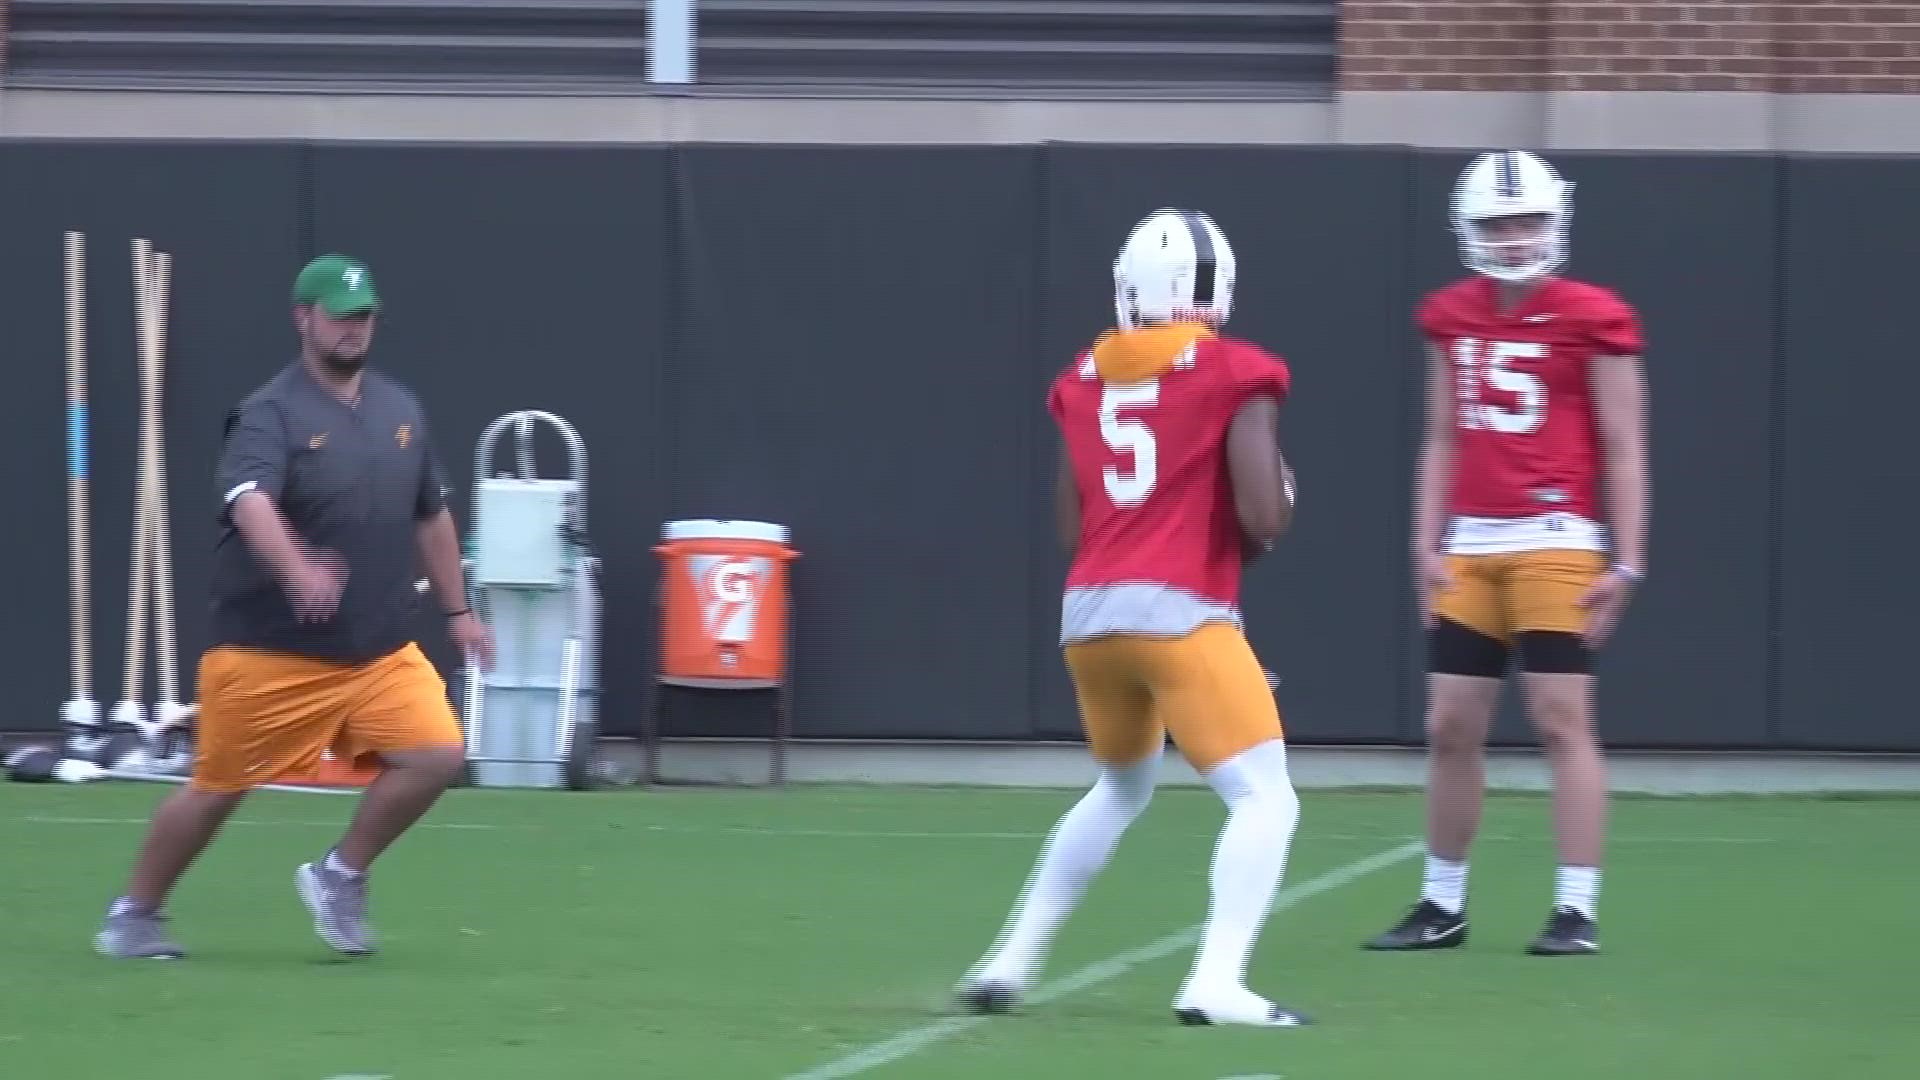 Check out highlights from the Vols' first day back on the field Wednesday.